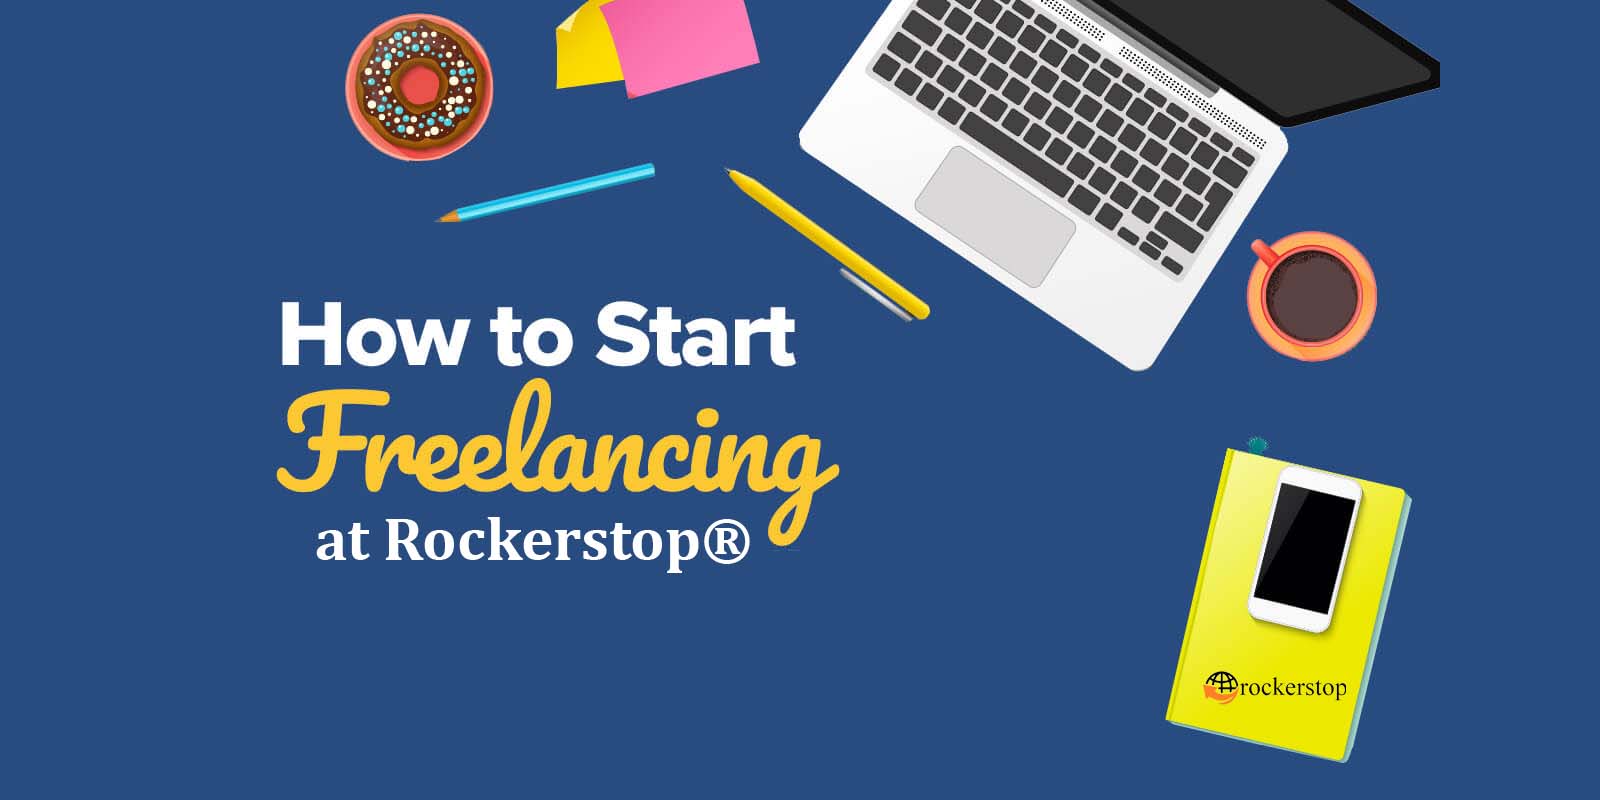 How To Start Freelancing at Rockerstop® | 5 Simple Steps